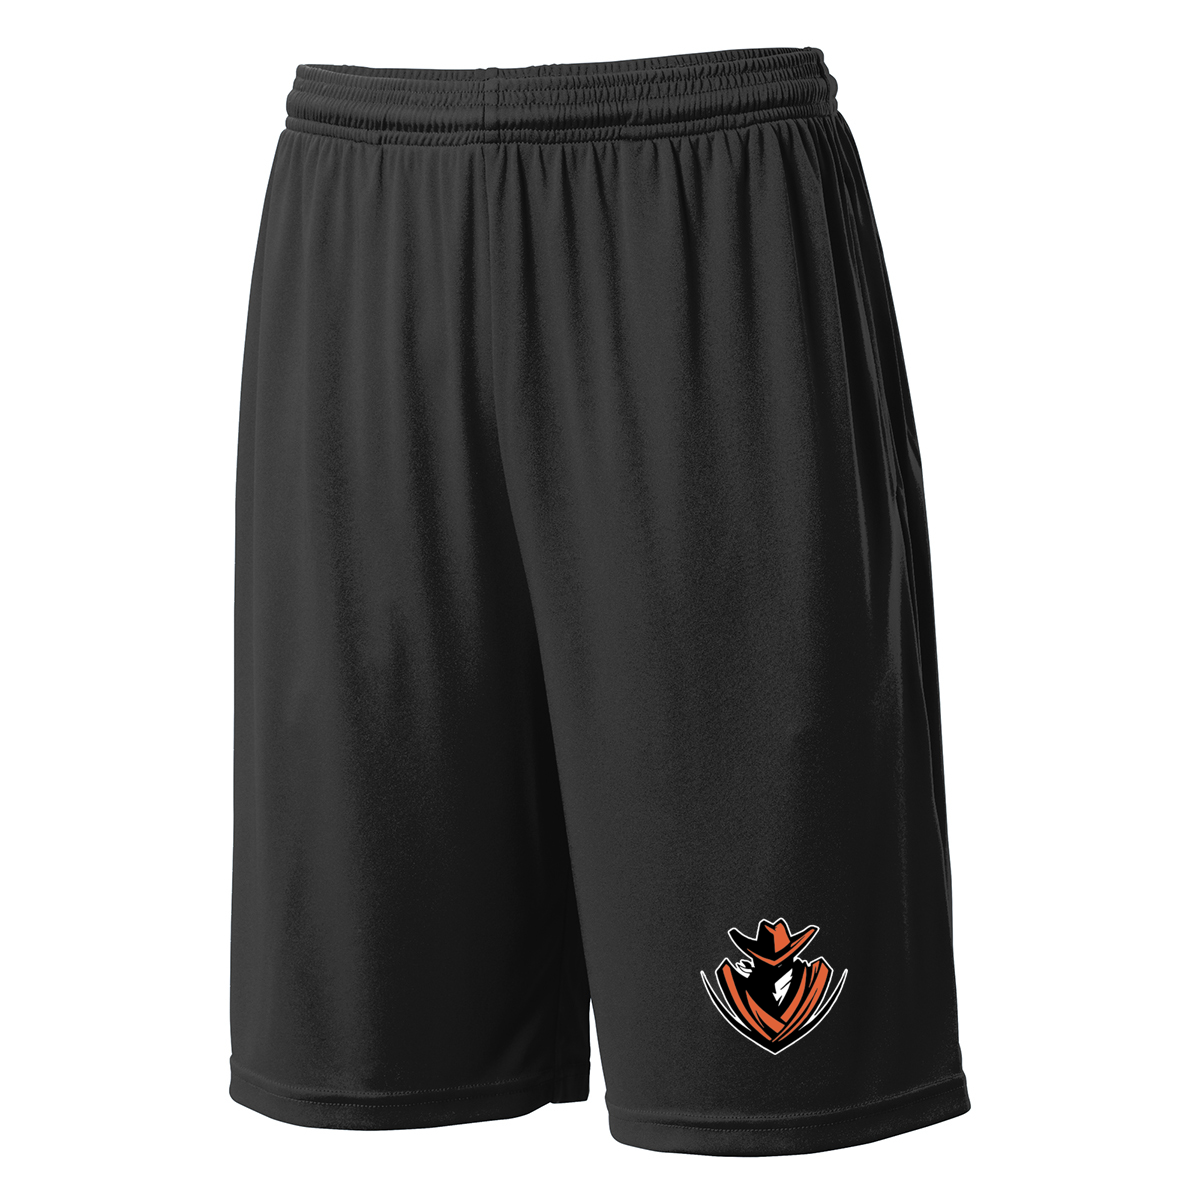 Outlaws Lacrosse Shorts